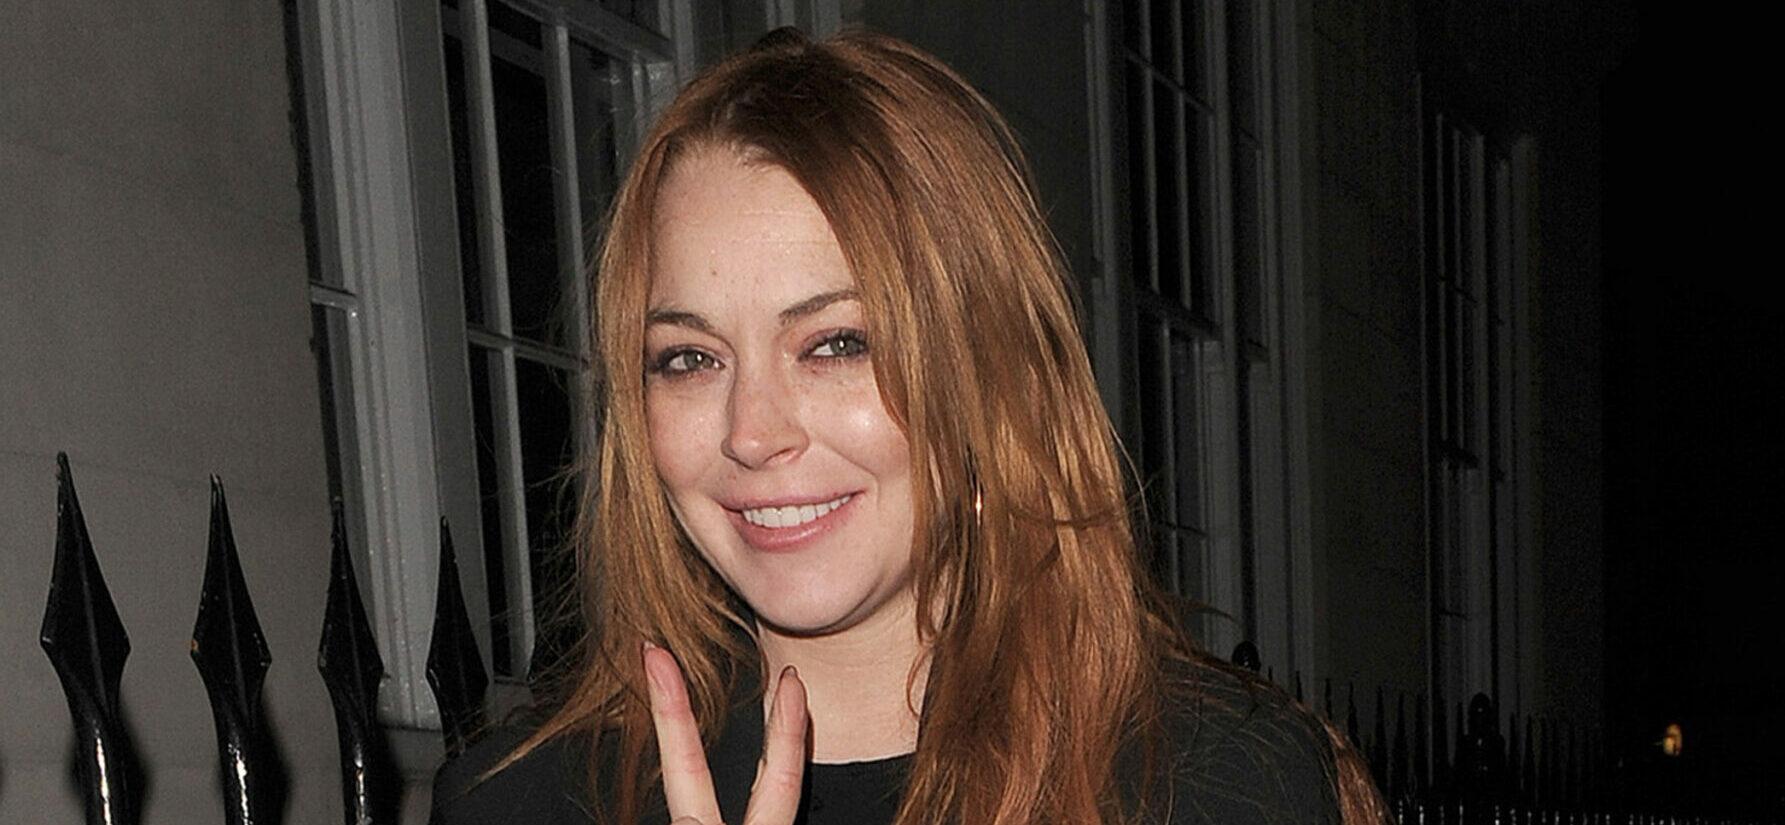 Lindsay Lohan enjoys dinner at C restaurant in Mayfair with a male companion The pair appeared close with Lindsay showing the man pictures on her phone